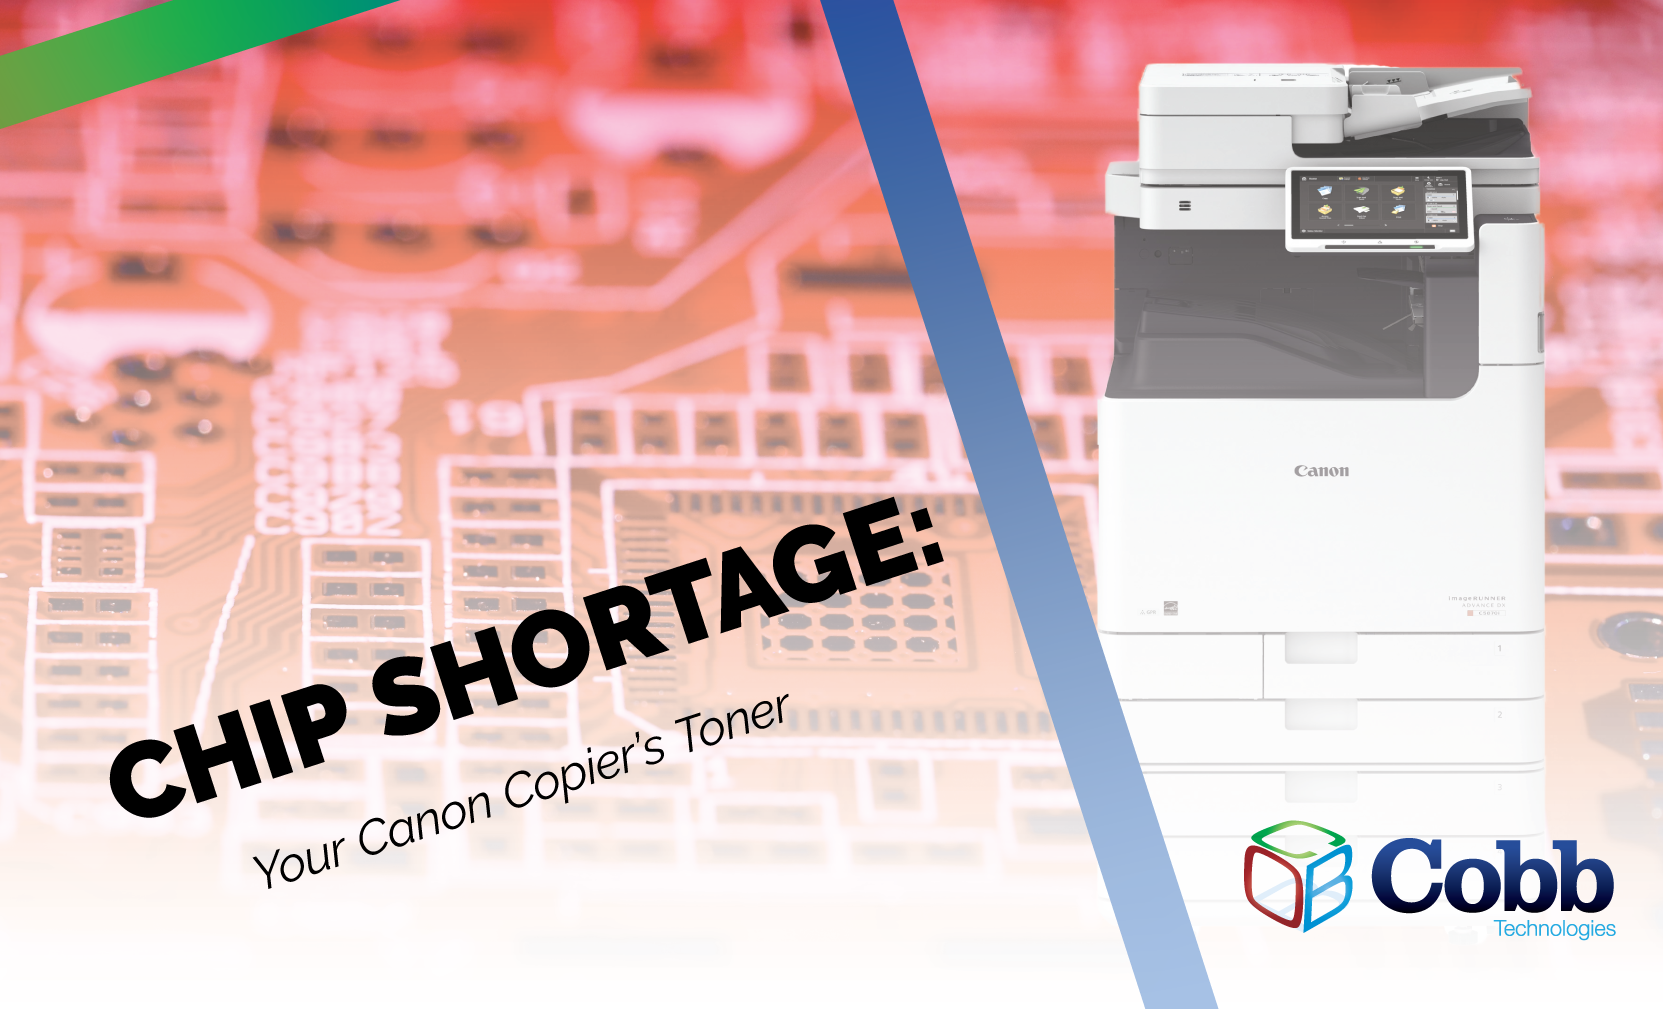 The Chip Shortage and Your Copier's Toner: What You Need to Know